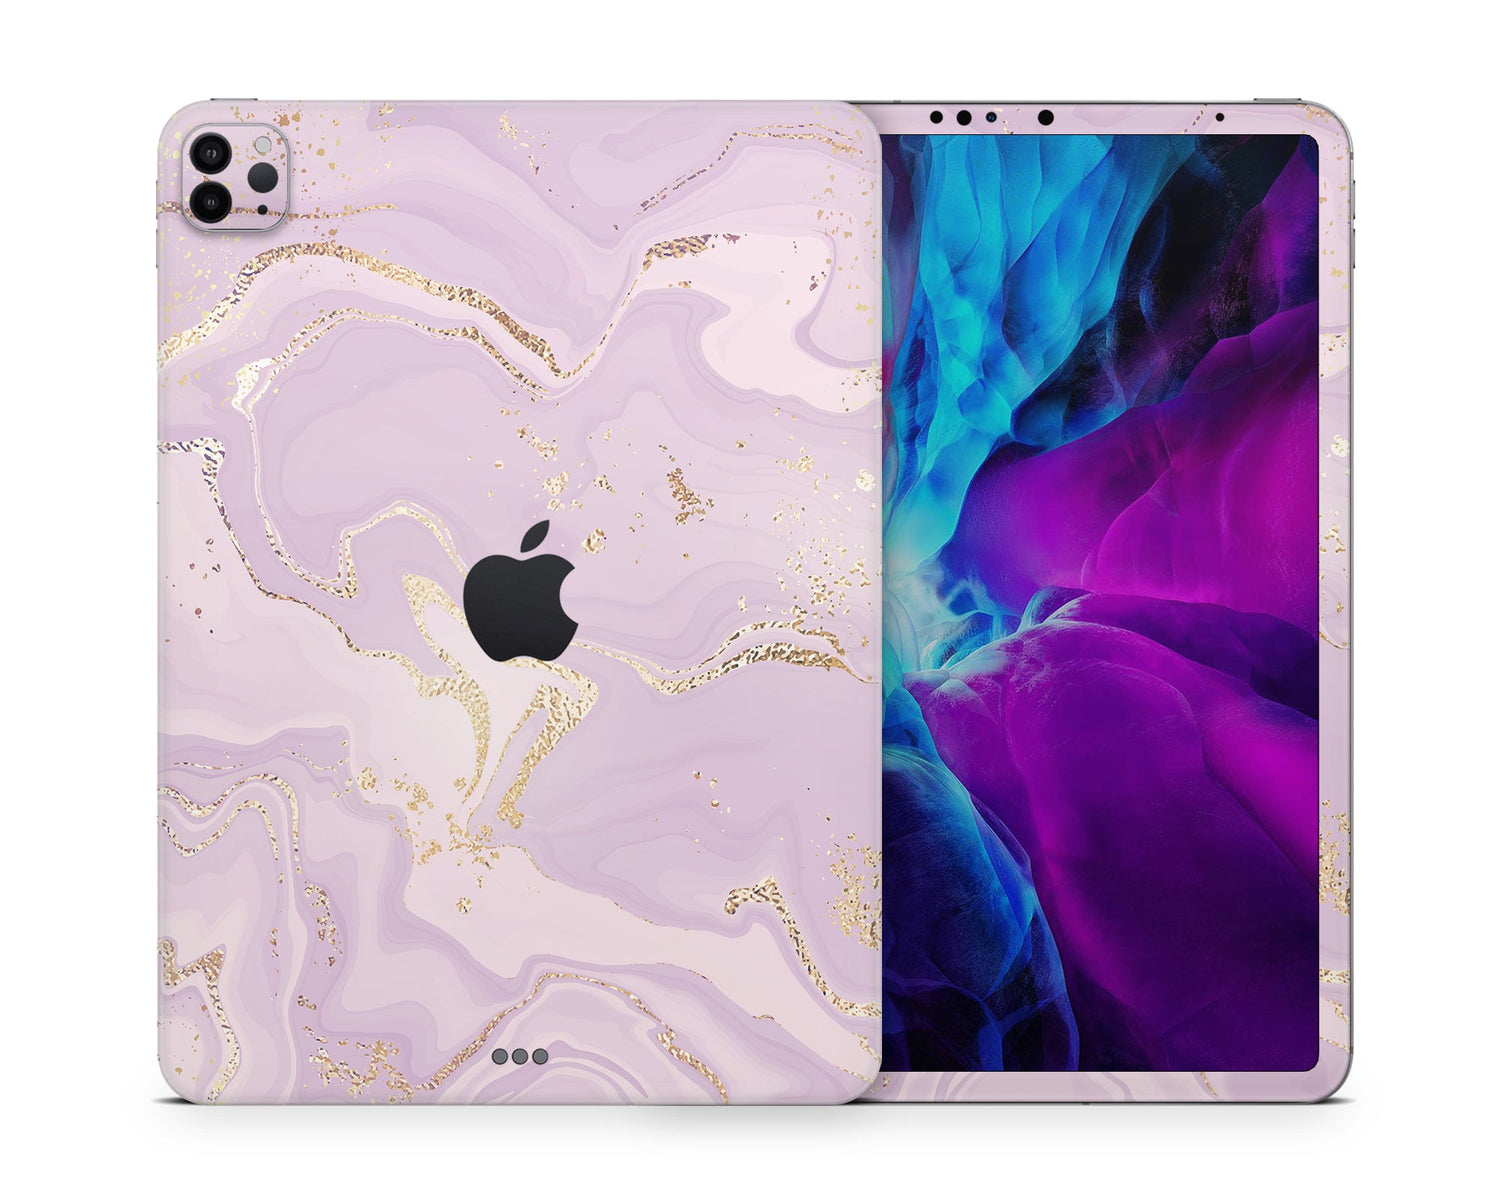 Lux Skins iPad Ethereal Lavender Gold Marble iPad Pro 12.9" Gen 5 Skins - Pattern Marble Skin